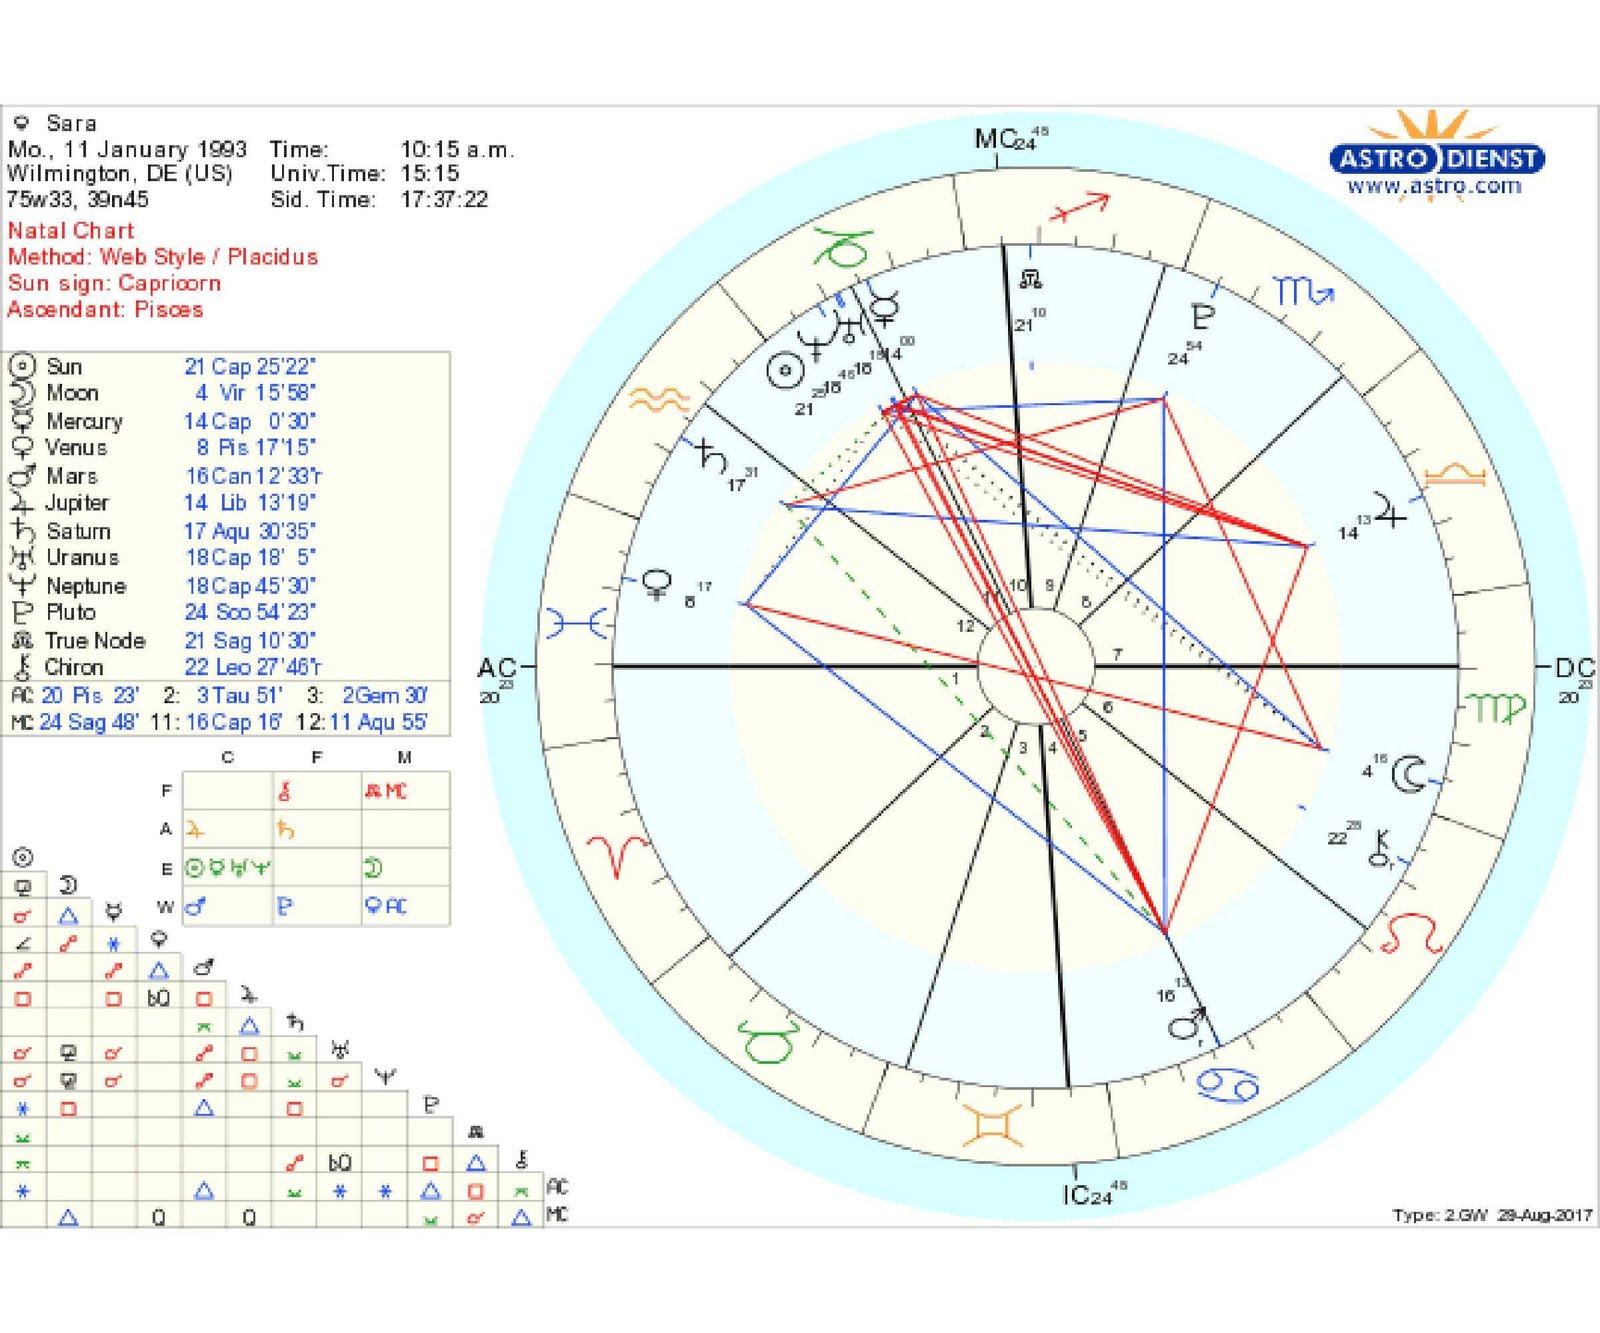 birth chart calculator with degrees